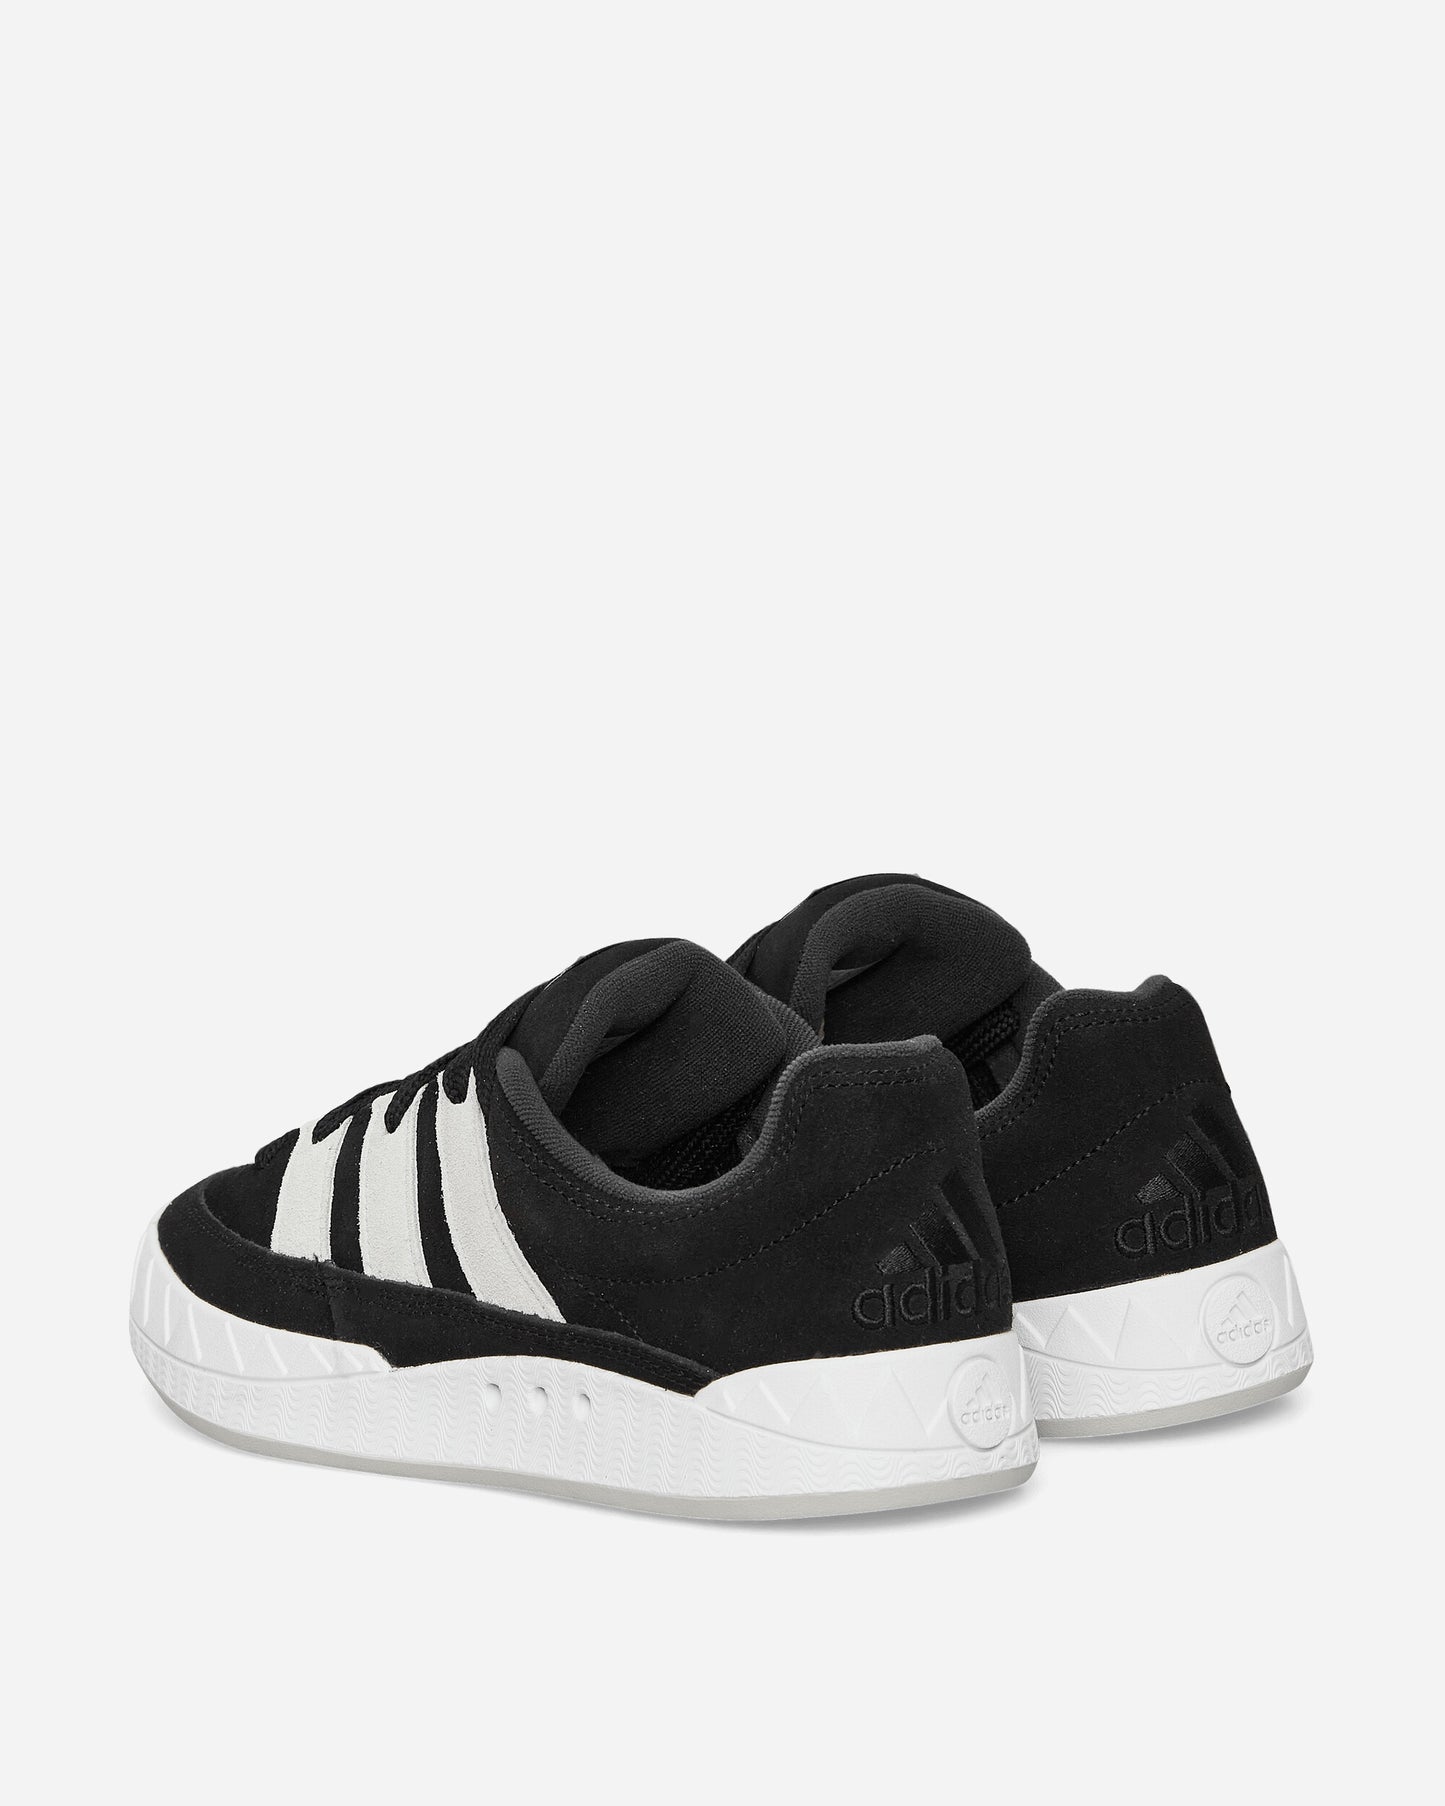 adidas Adimatic Core Black/Crystal White Sneakers Low ID8265 001